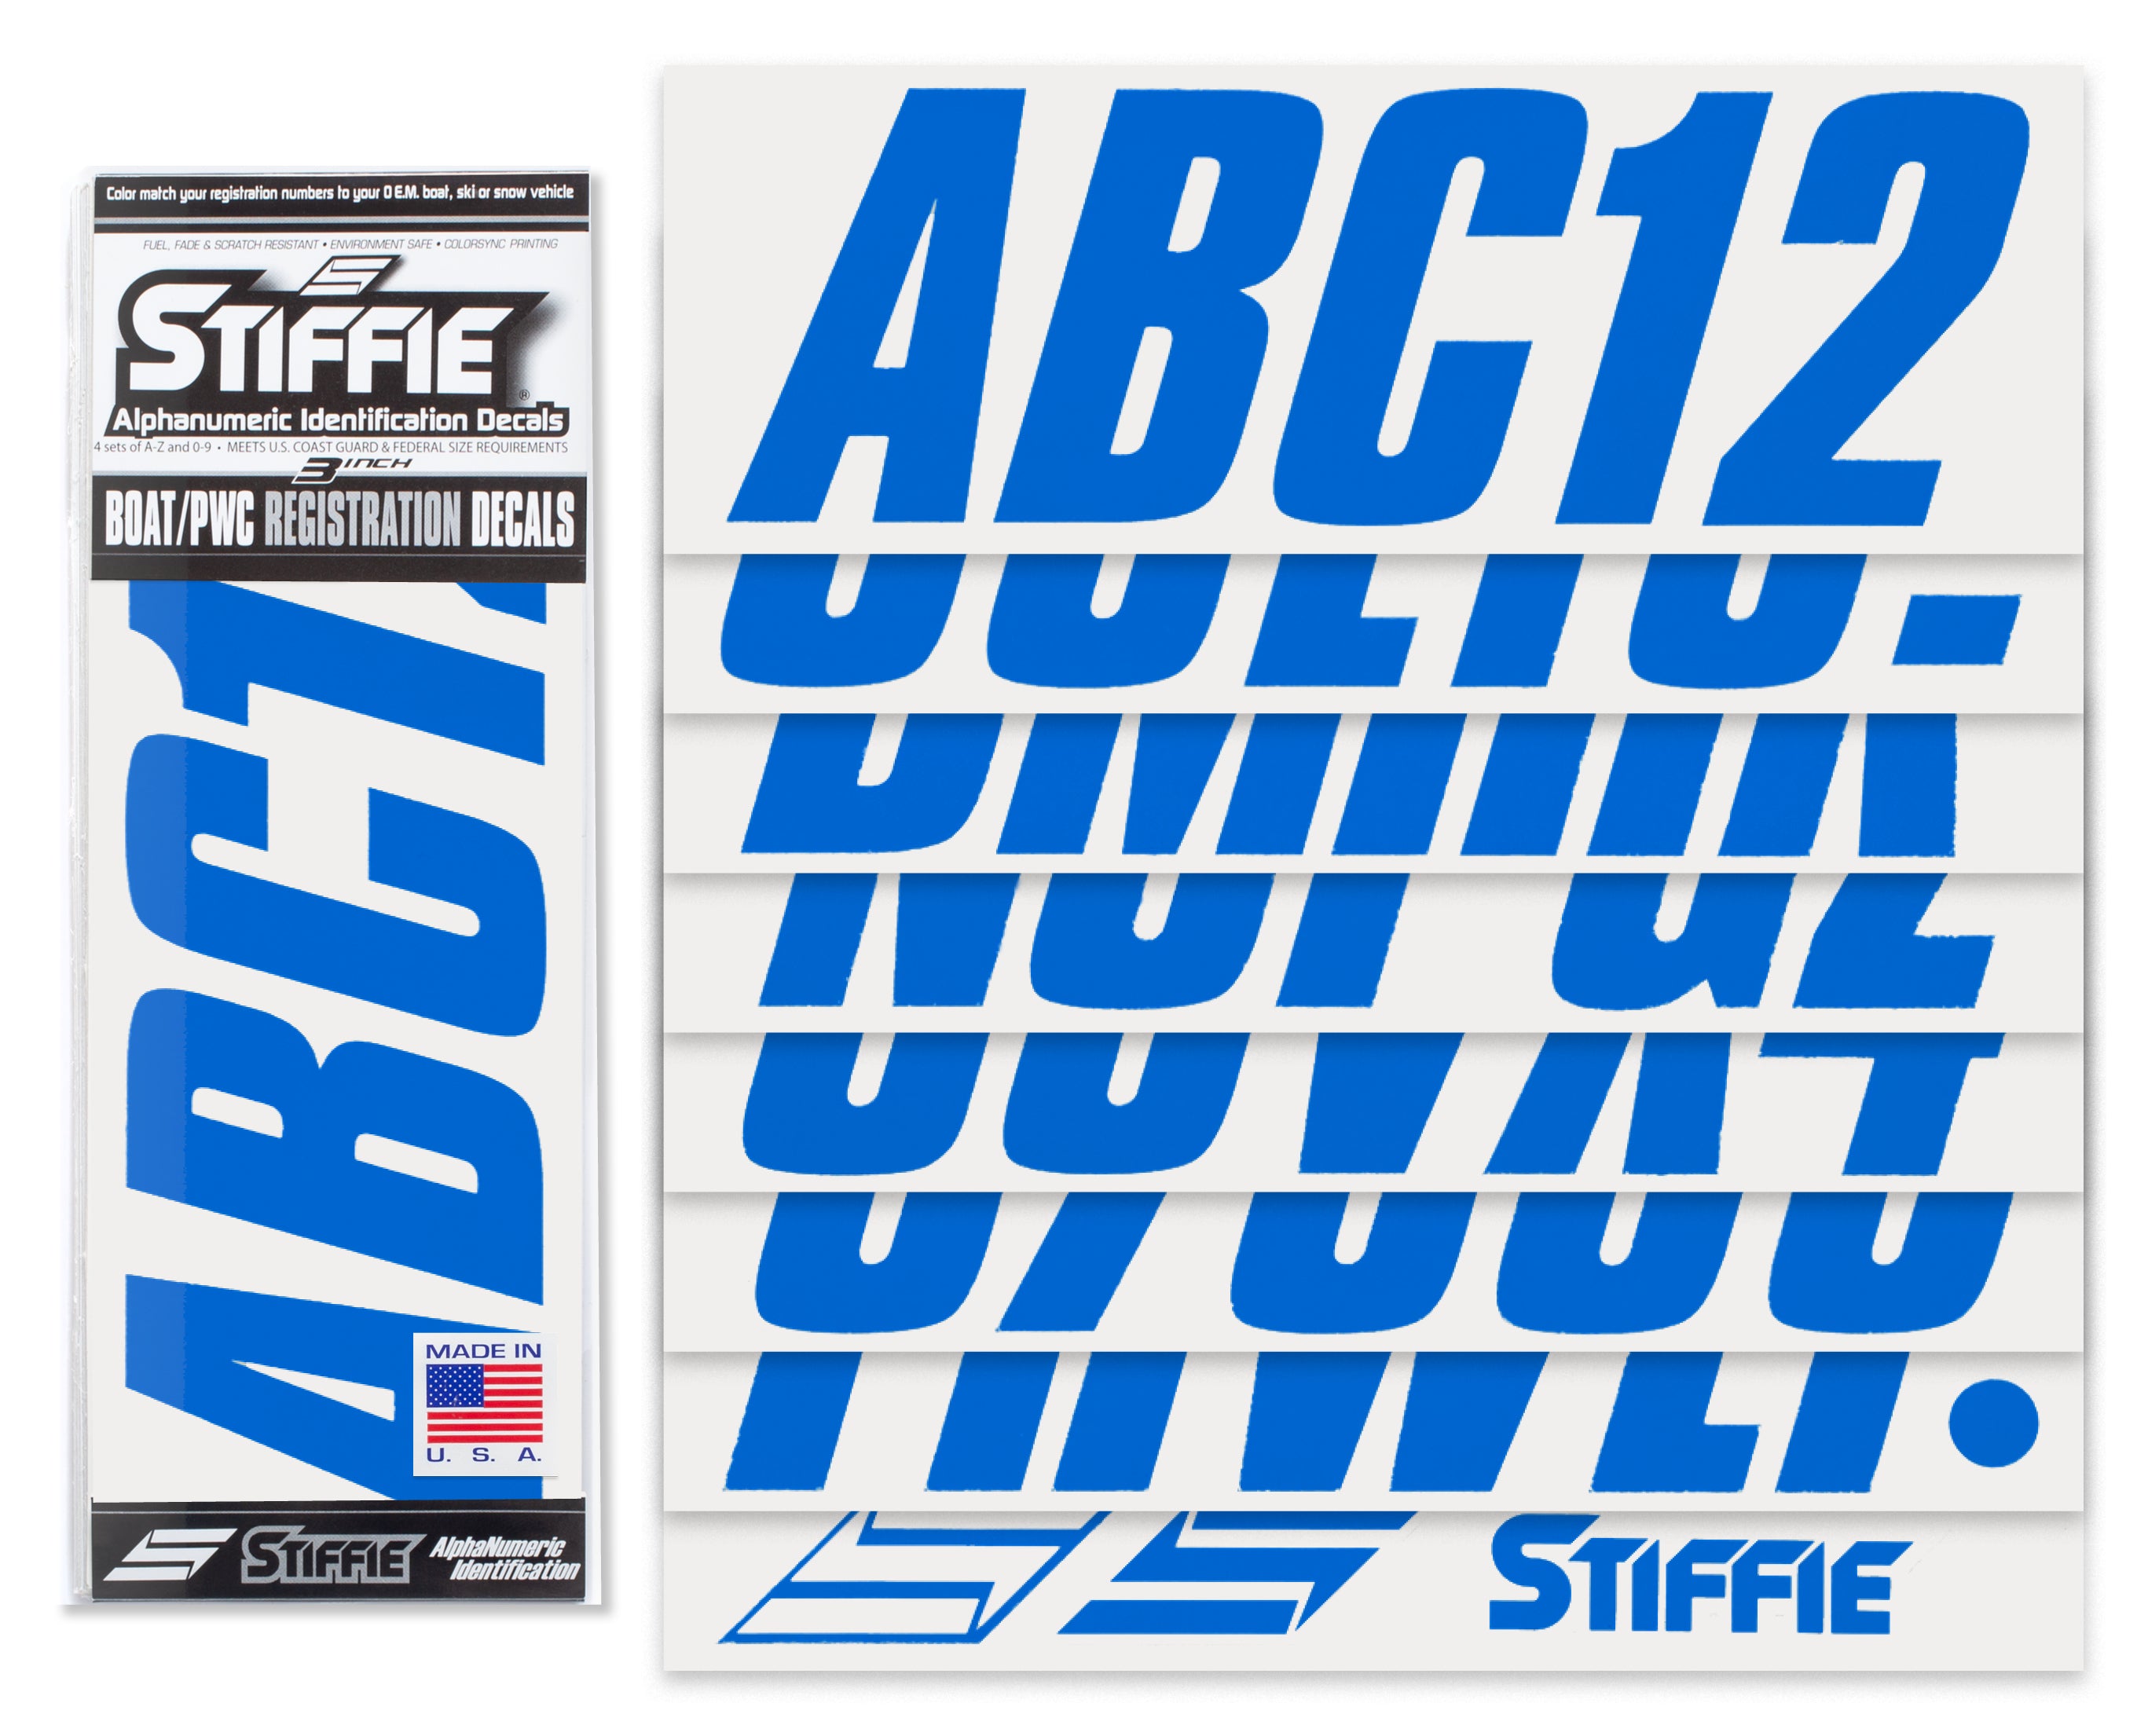 STIFFIE Shift Octane Blue 3" ID Kit Alpha-Numeric Registration Identification Numbers Stickers Decals for Boats & Personal Watercraft